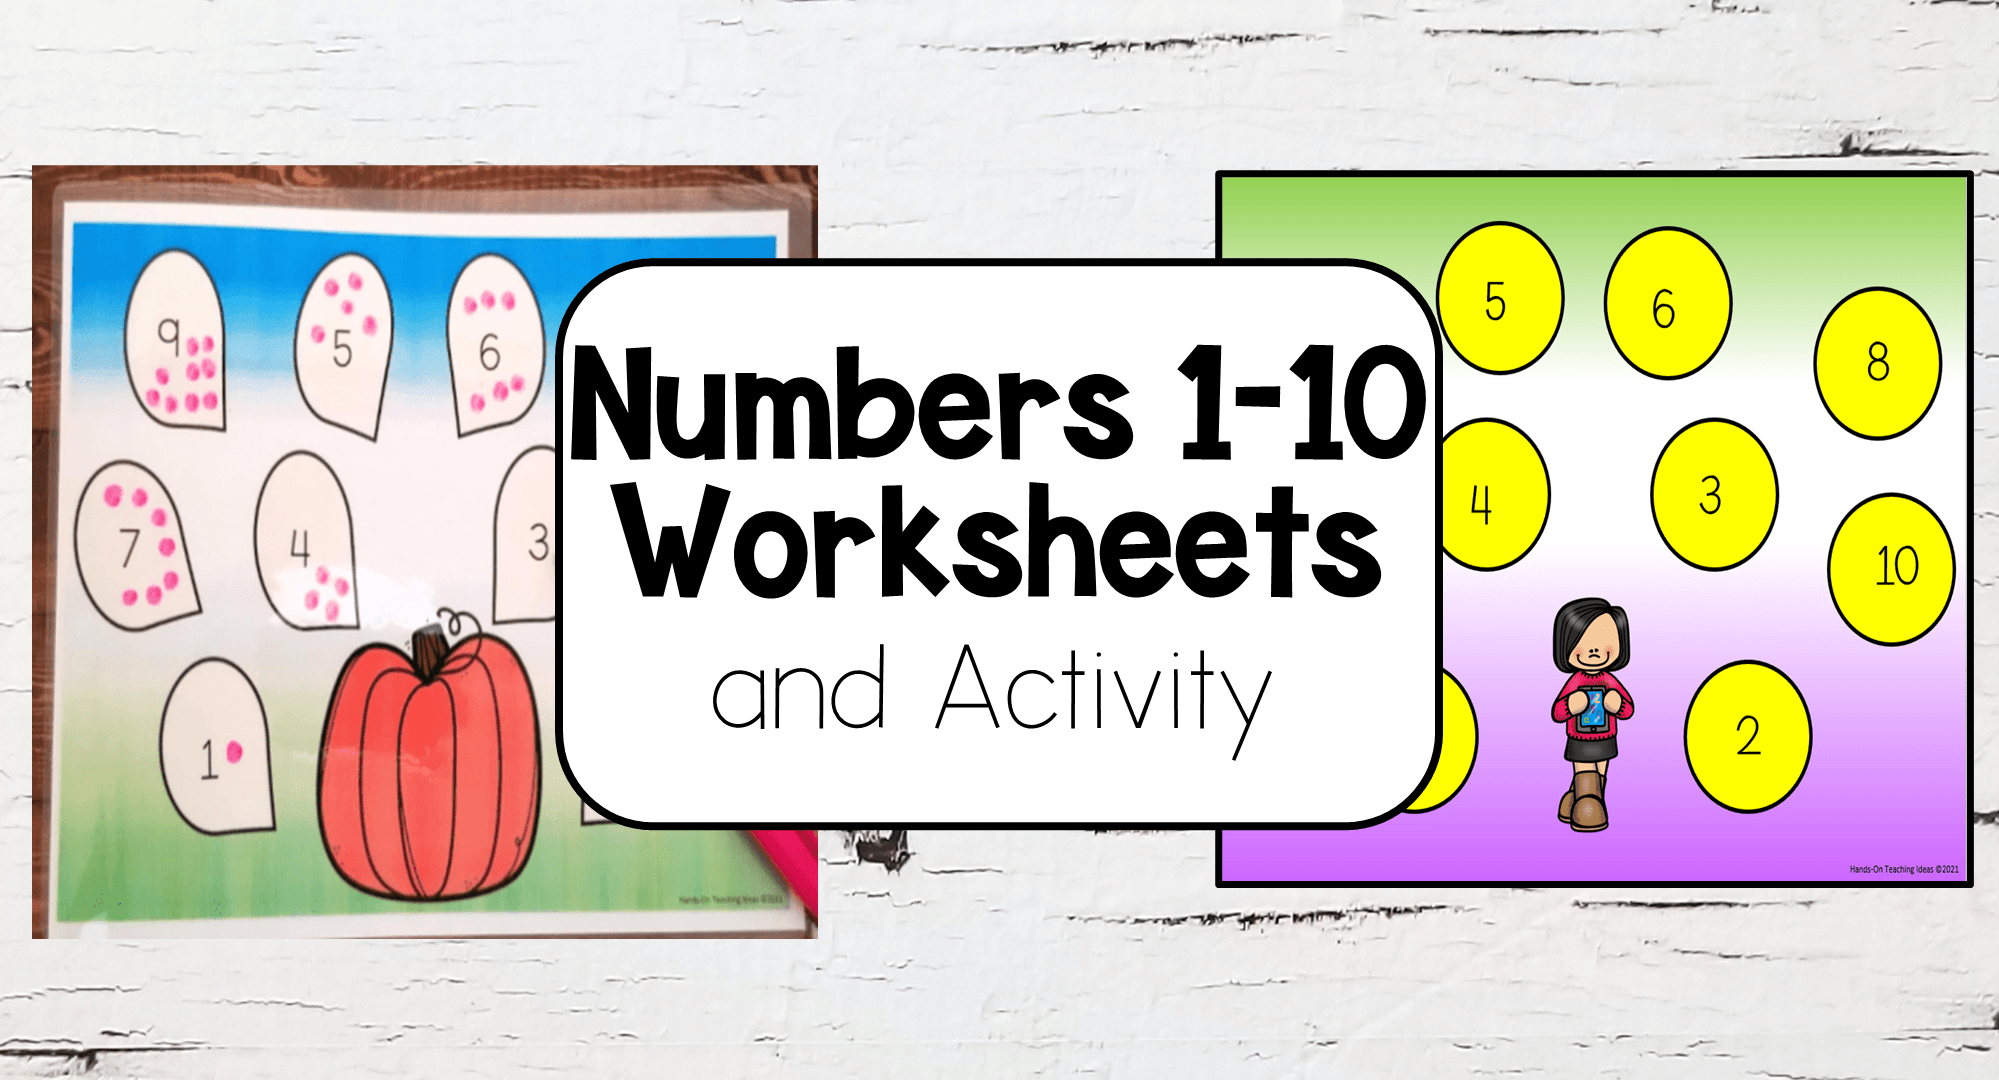 FREE Kindergarten Worksheets and Activity - Hands-On Teaching Ideas